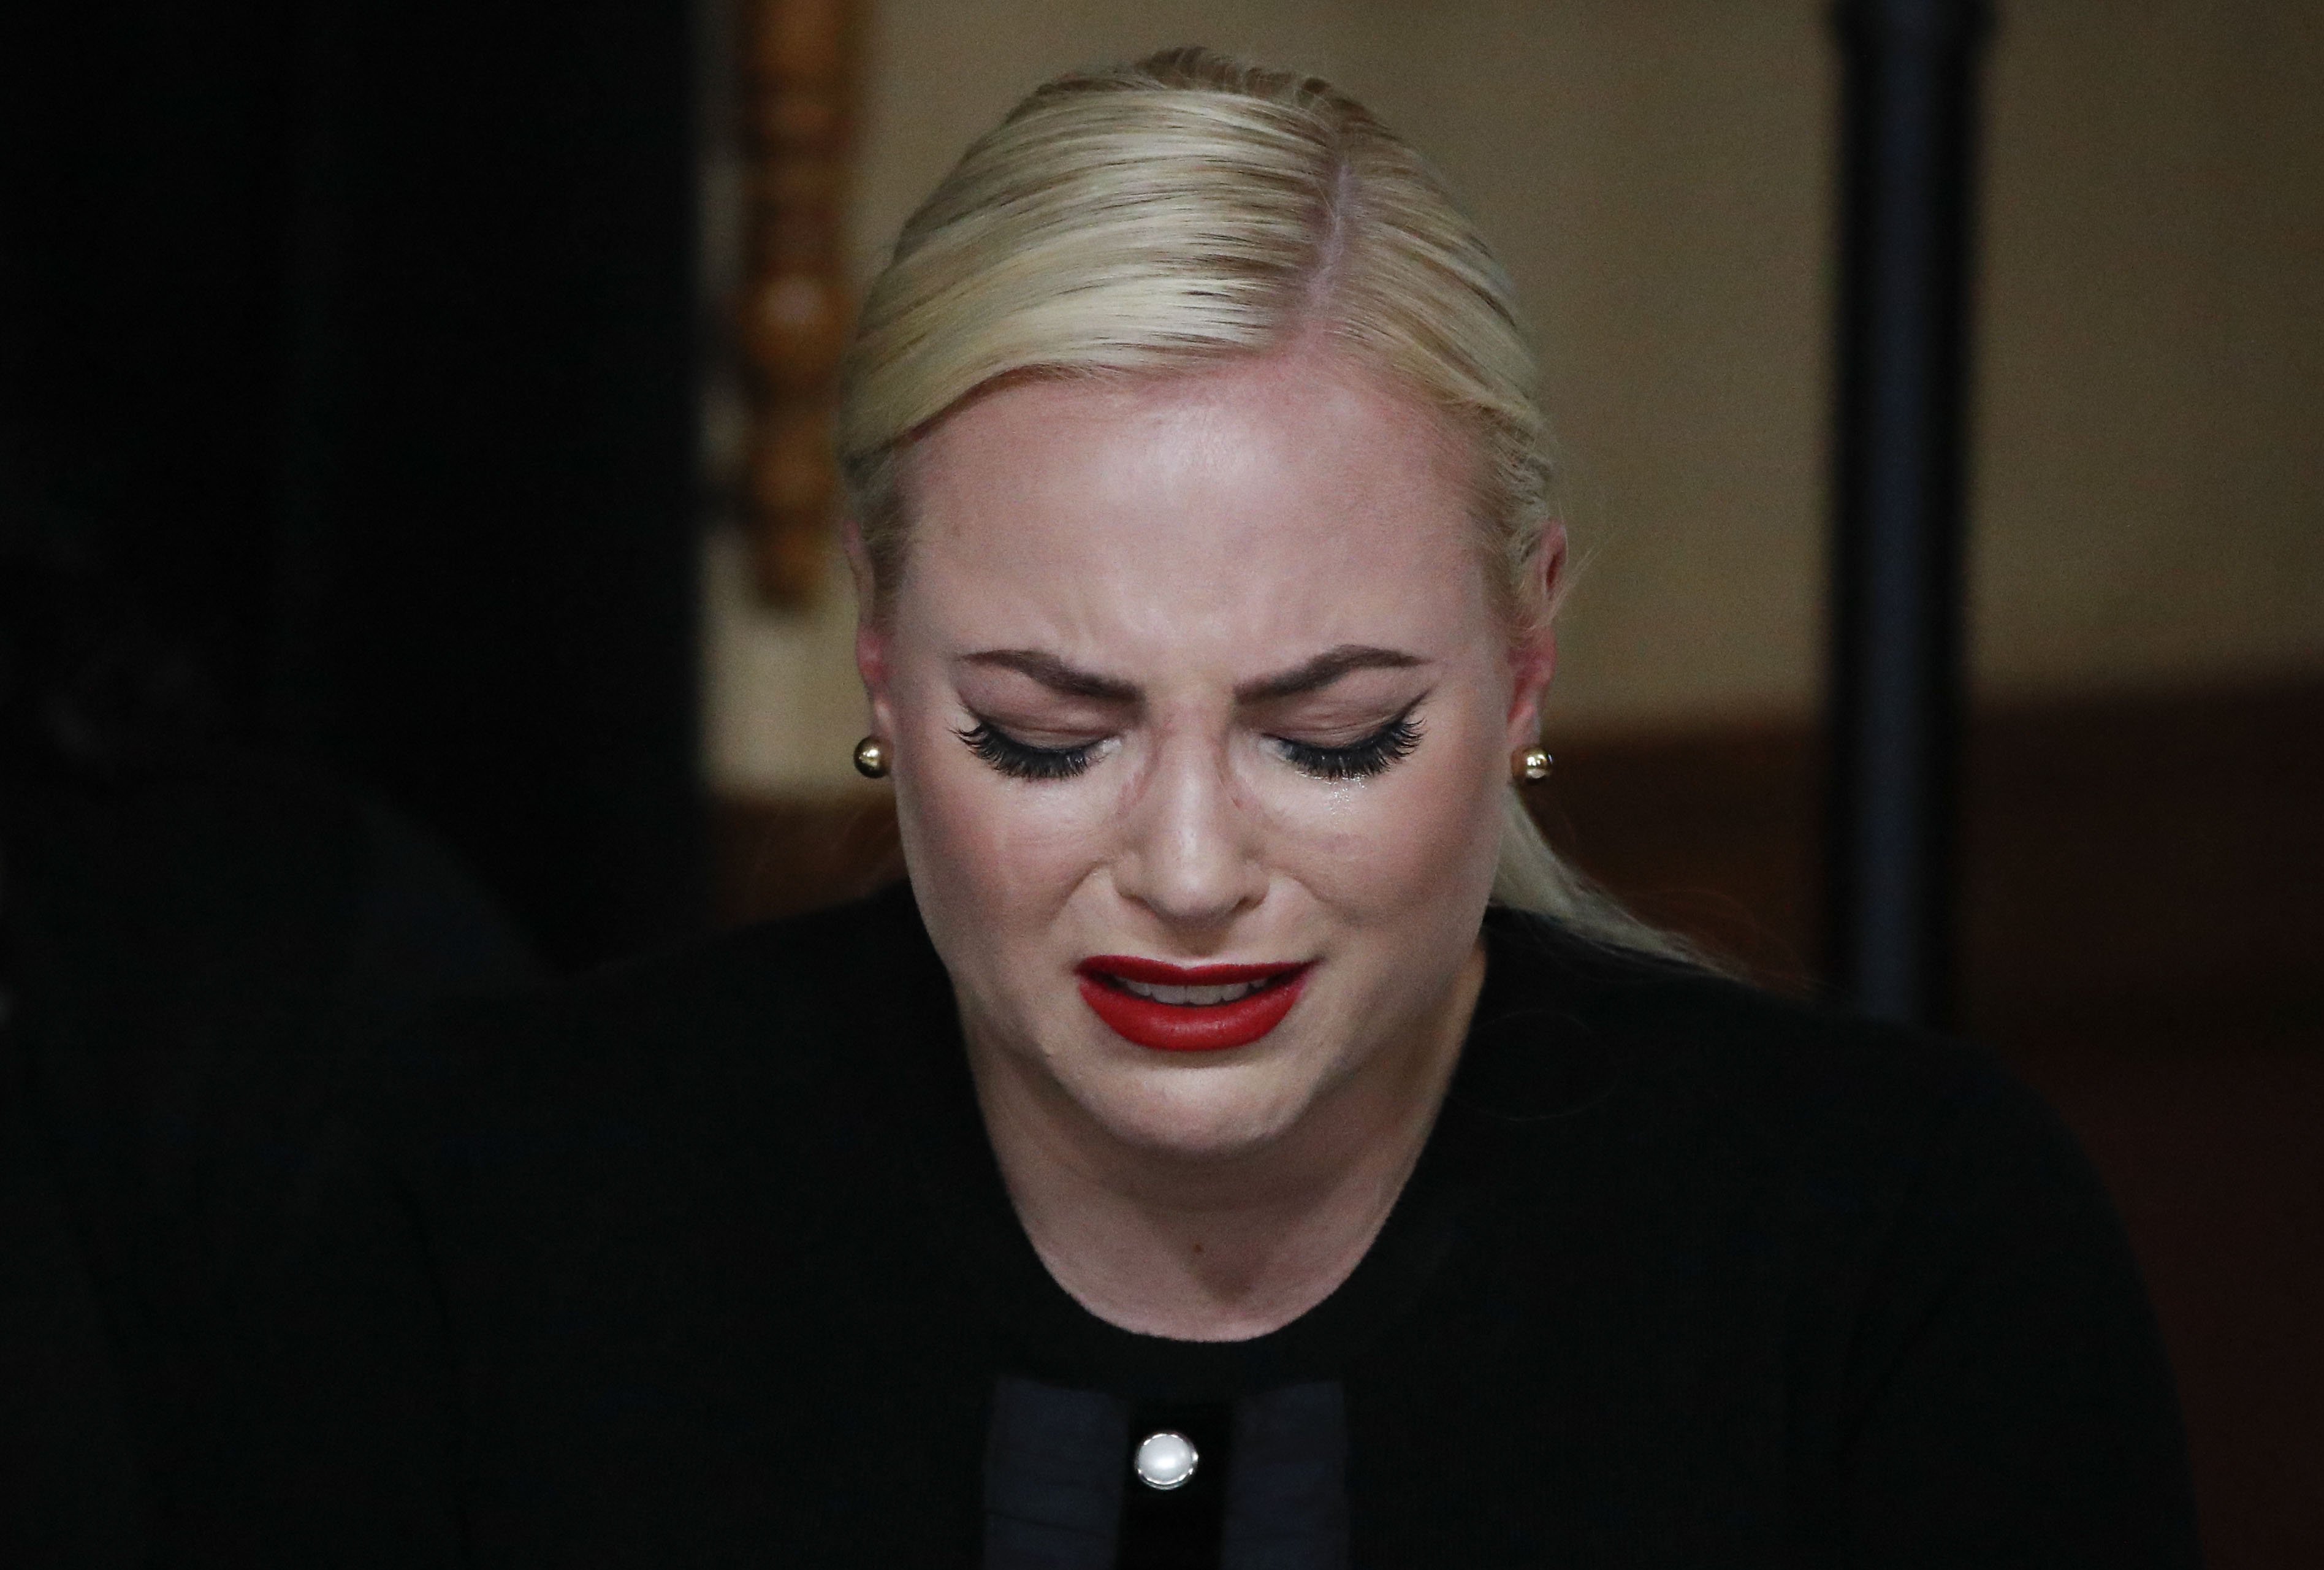  Meghan McCain, touches the casket during a memorial service for the late Sen. John McCain, at the Arizona Capitol on August 29, 2018, in Phoenix, Arizona | Source : Getty Images 